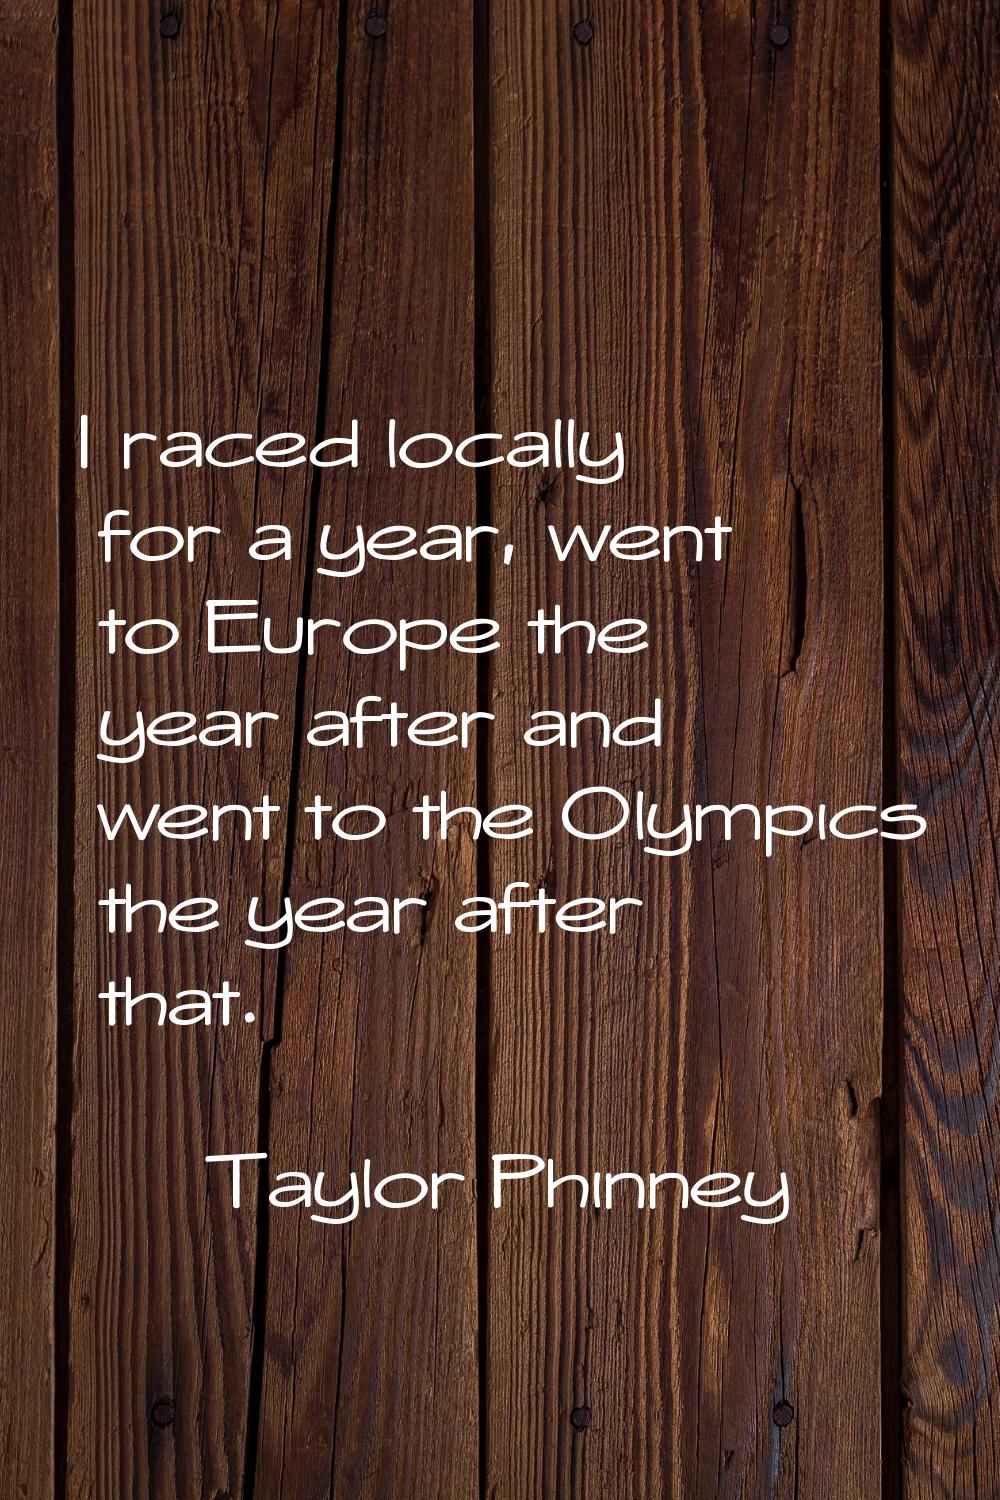 I raced locally for a year, went to Europe the year after and went to the Olympics the year after t